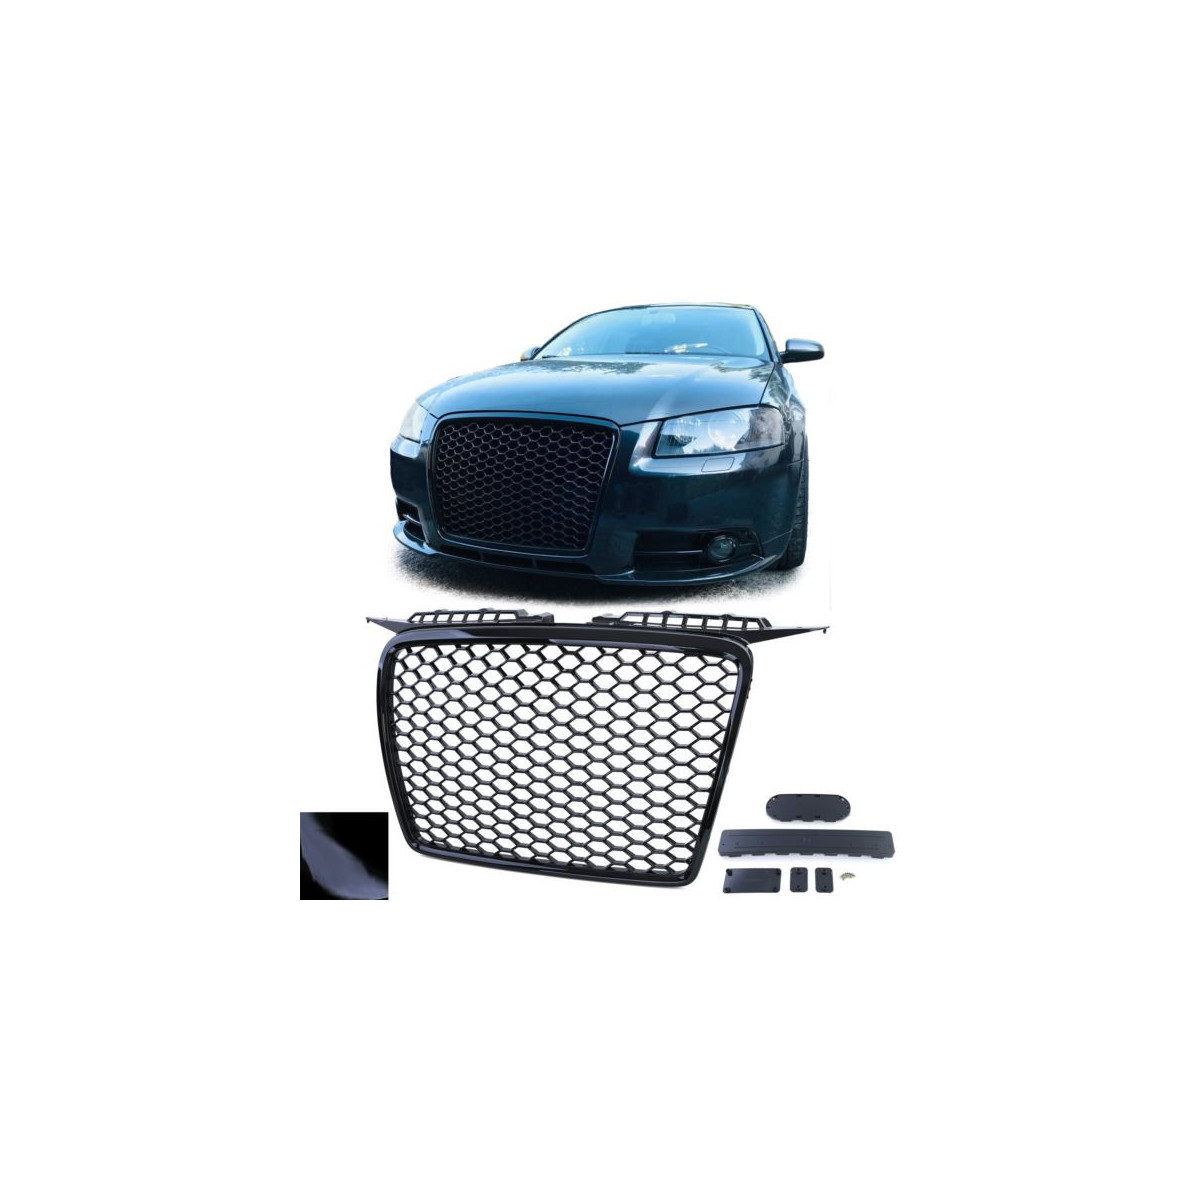 GRILL AUDI A3 05-08 RS LOOK GLOSSY BLACK